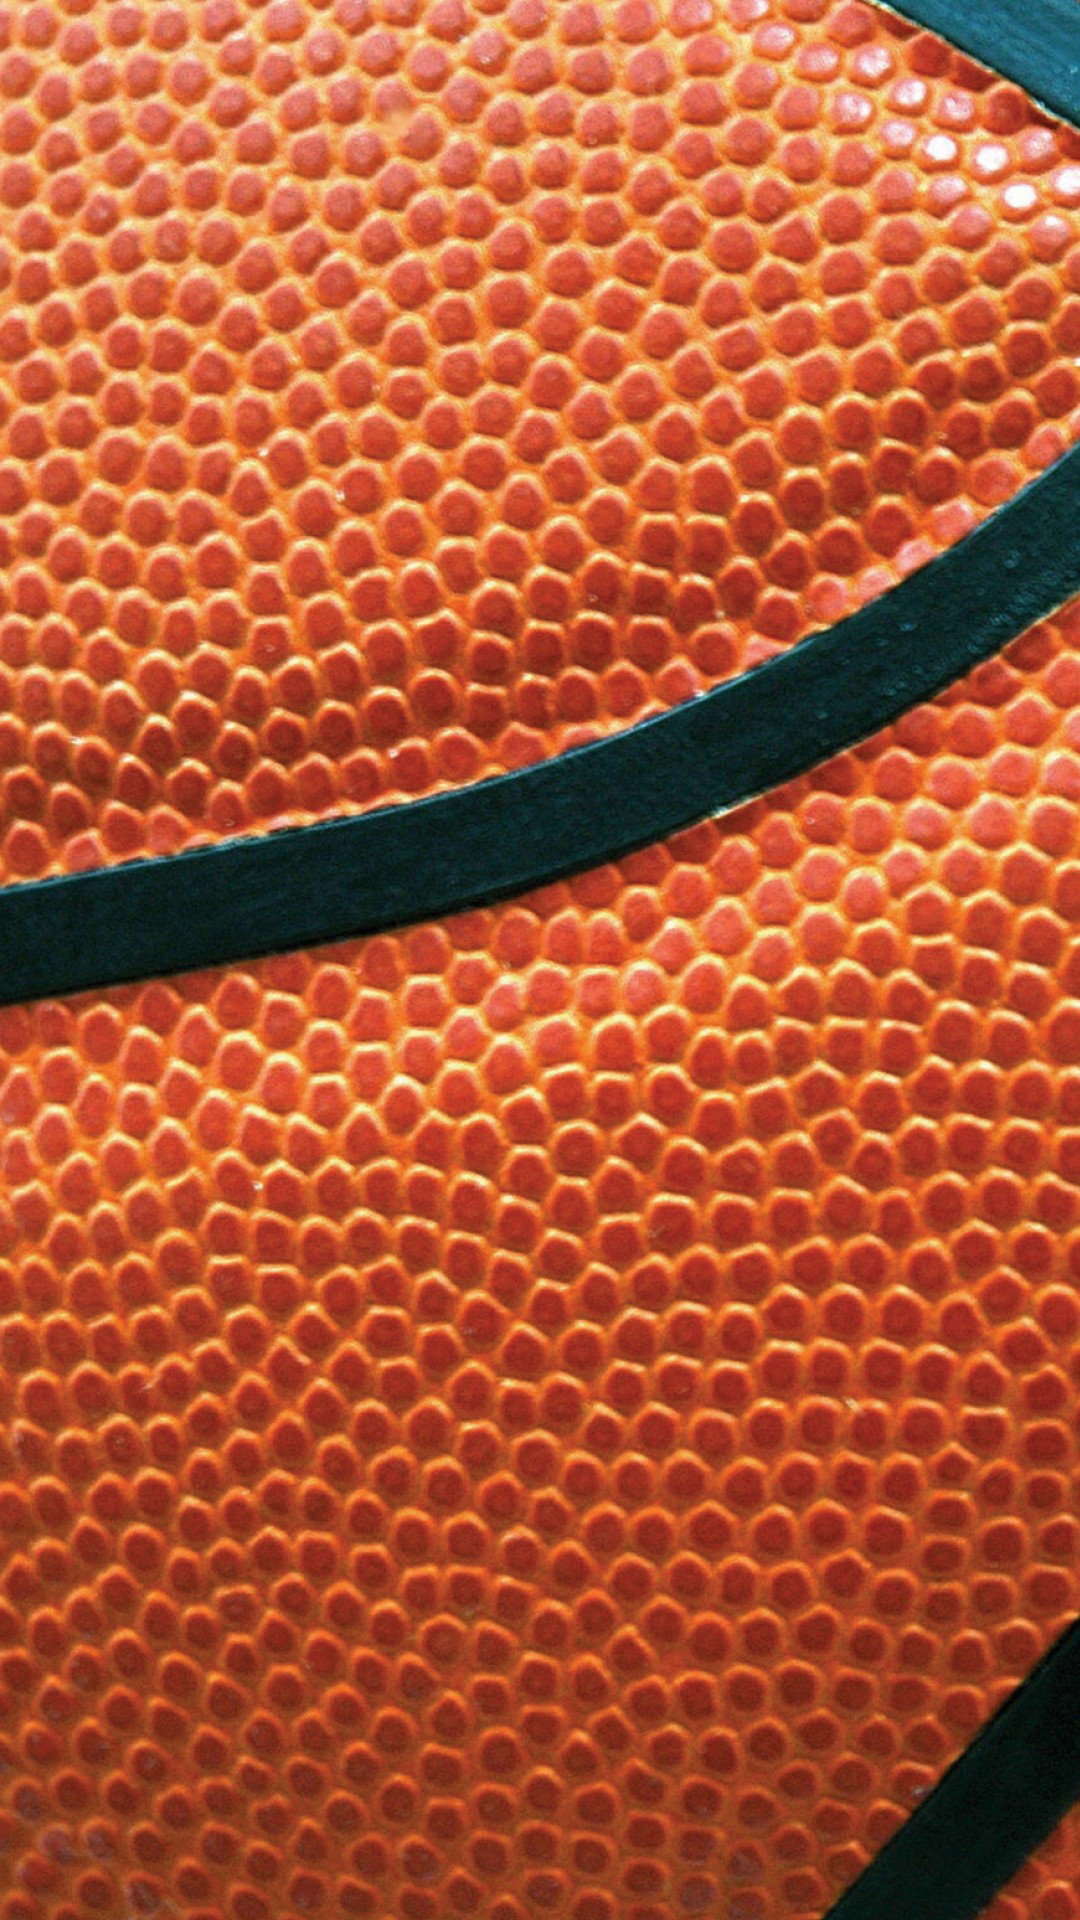 1080x1920 ... iphone 7 wallpaper sports; basketball close up android wallpaper free  download ...